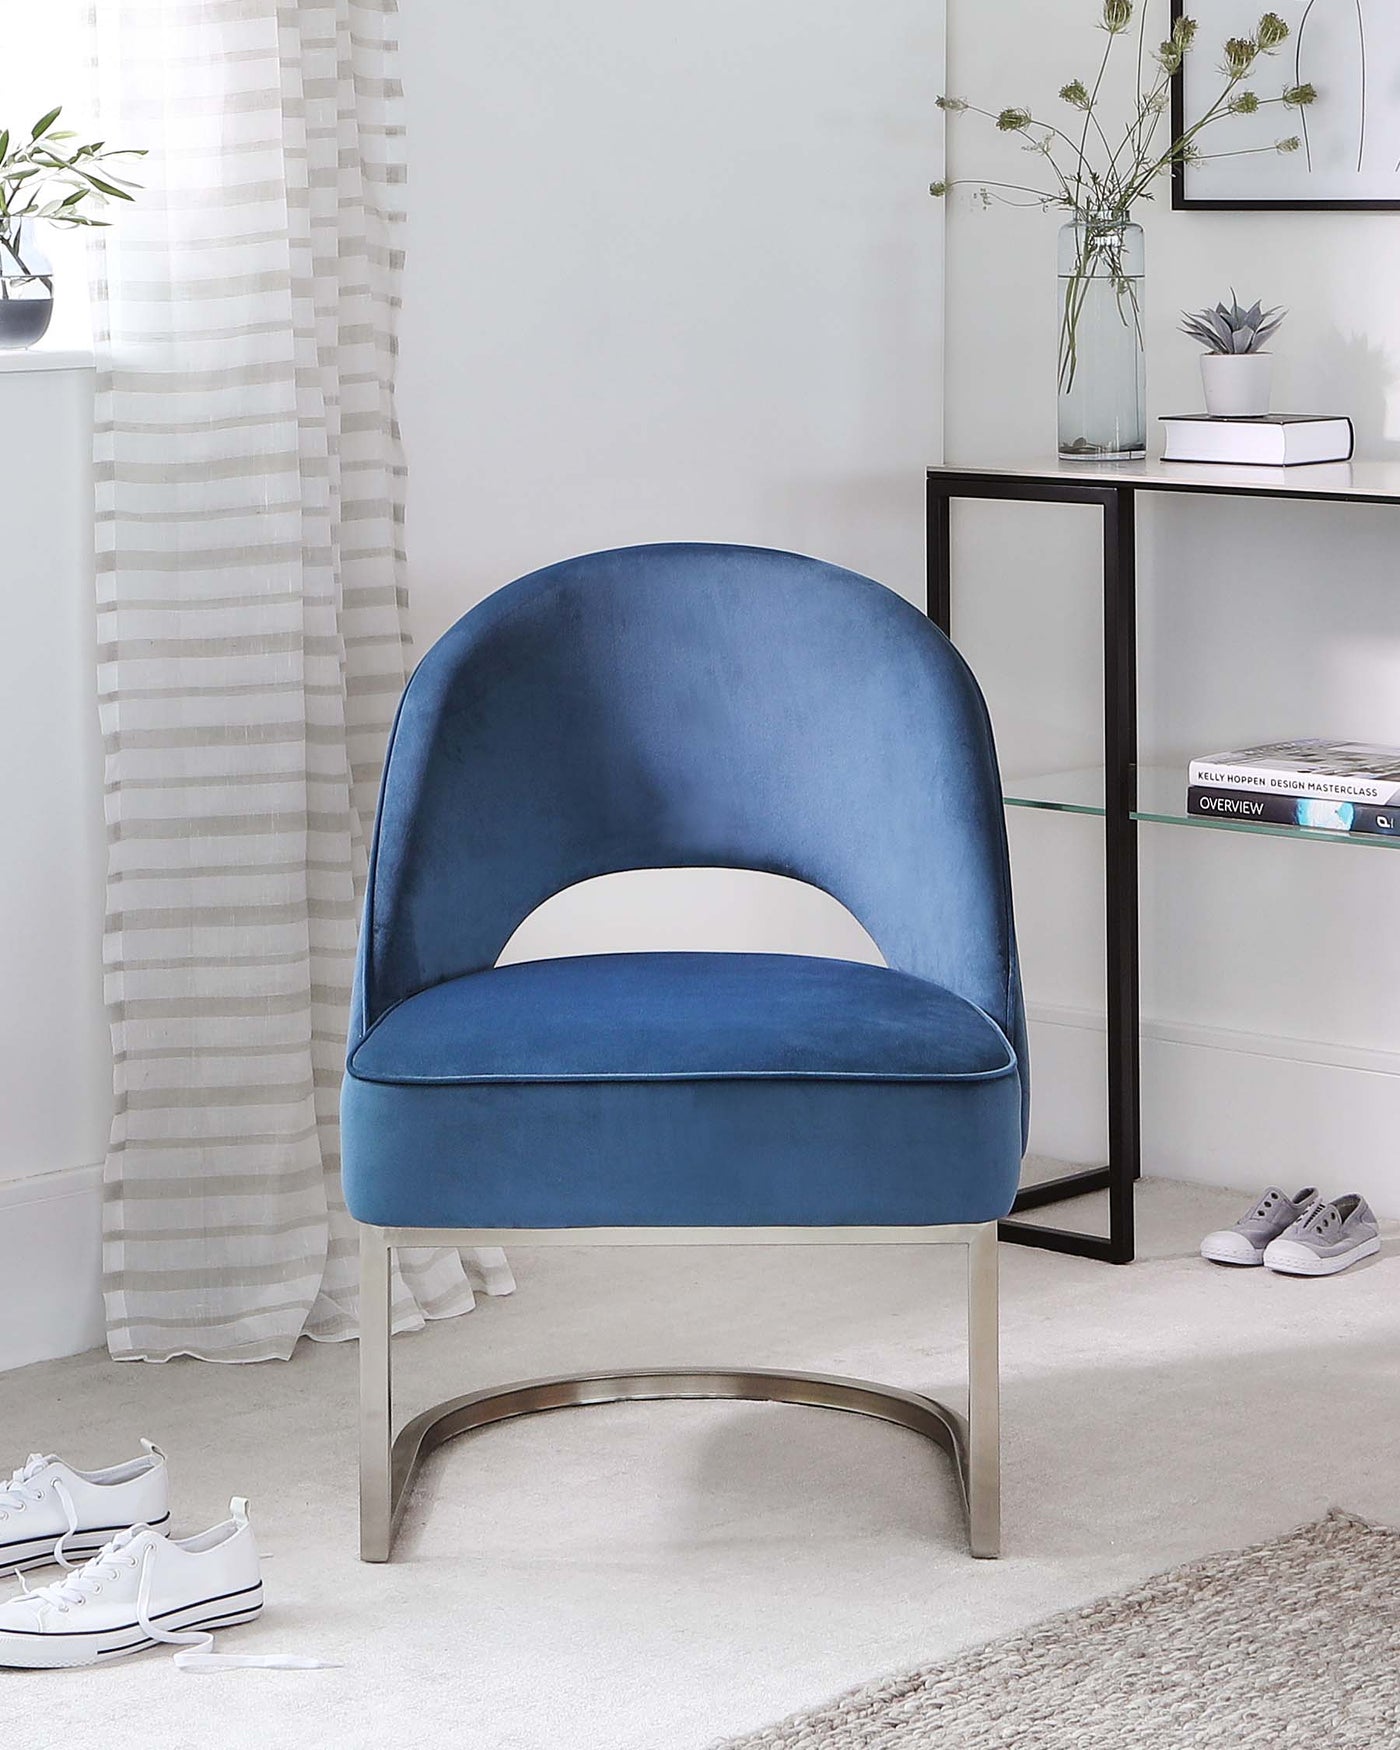 Modern blue velvet accent chair with a curved high-back design and a metal silver base. Adjacent to the chair is a contemporary glass and metal frame side table with two shelves housing books and decorative items.